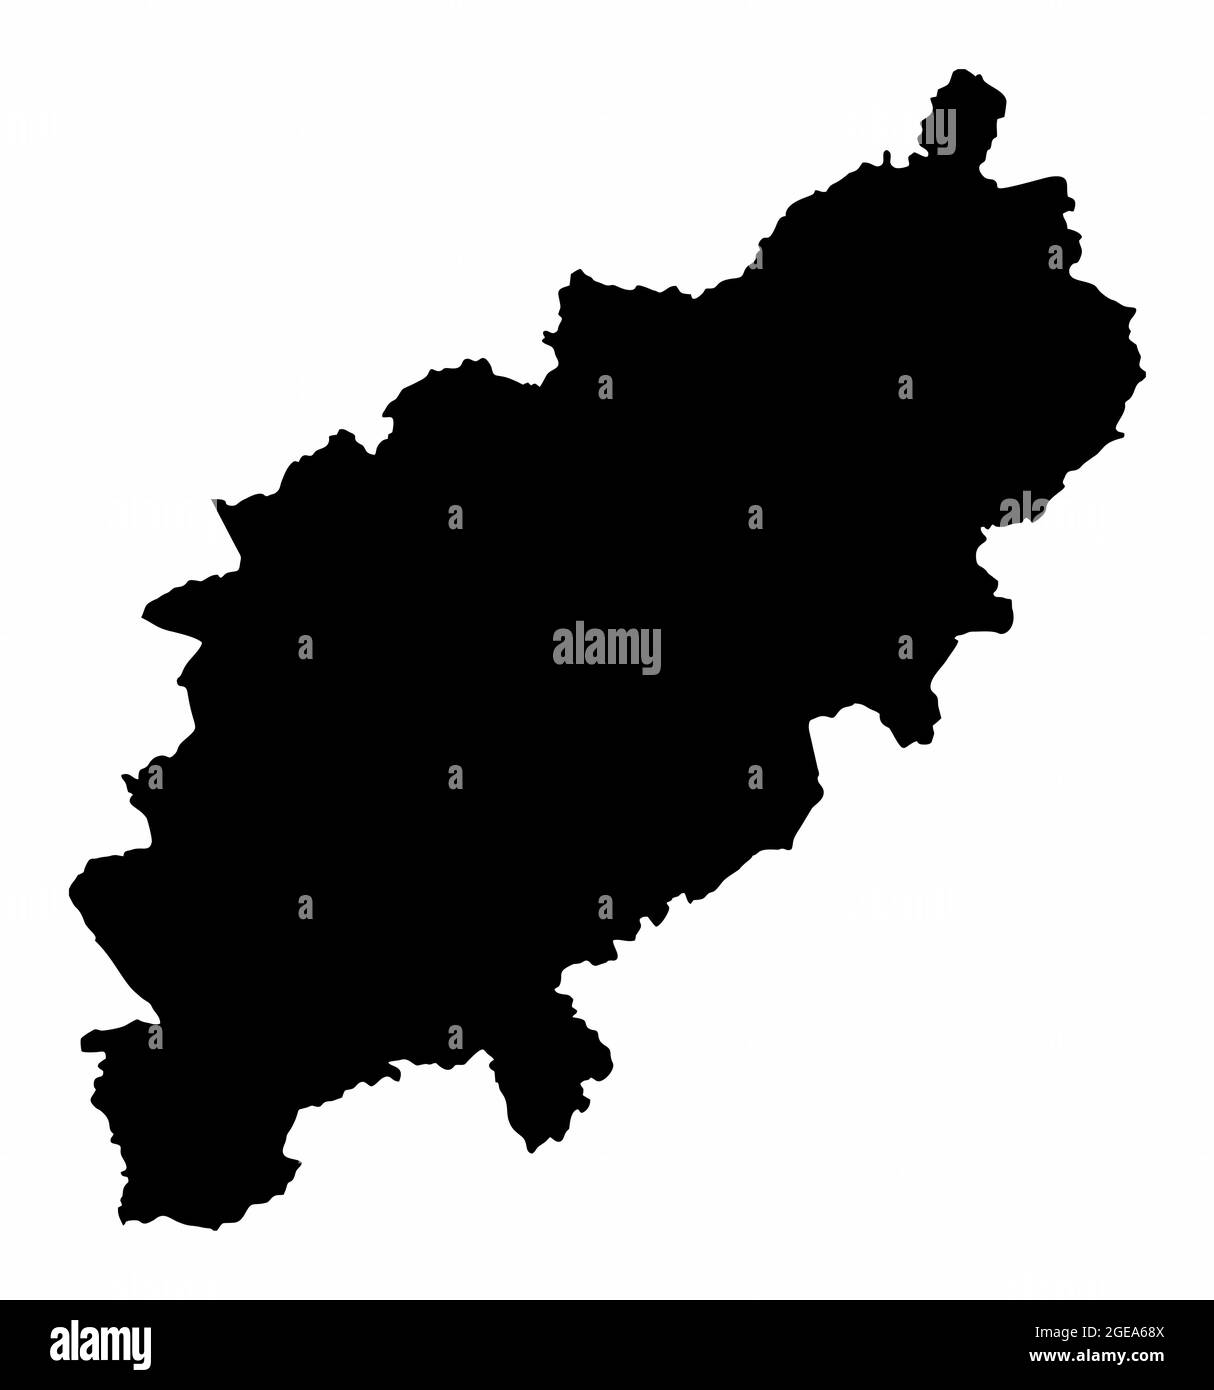 Northamptonshire county dark silhouette map isolated on white background, England Stock Vector